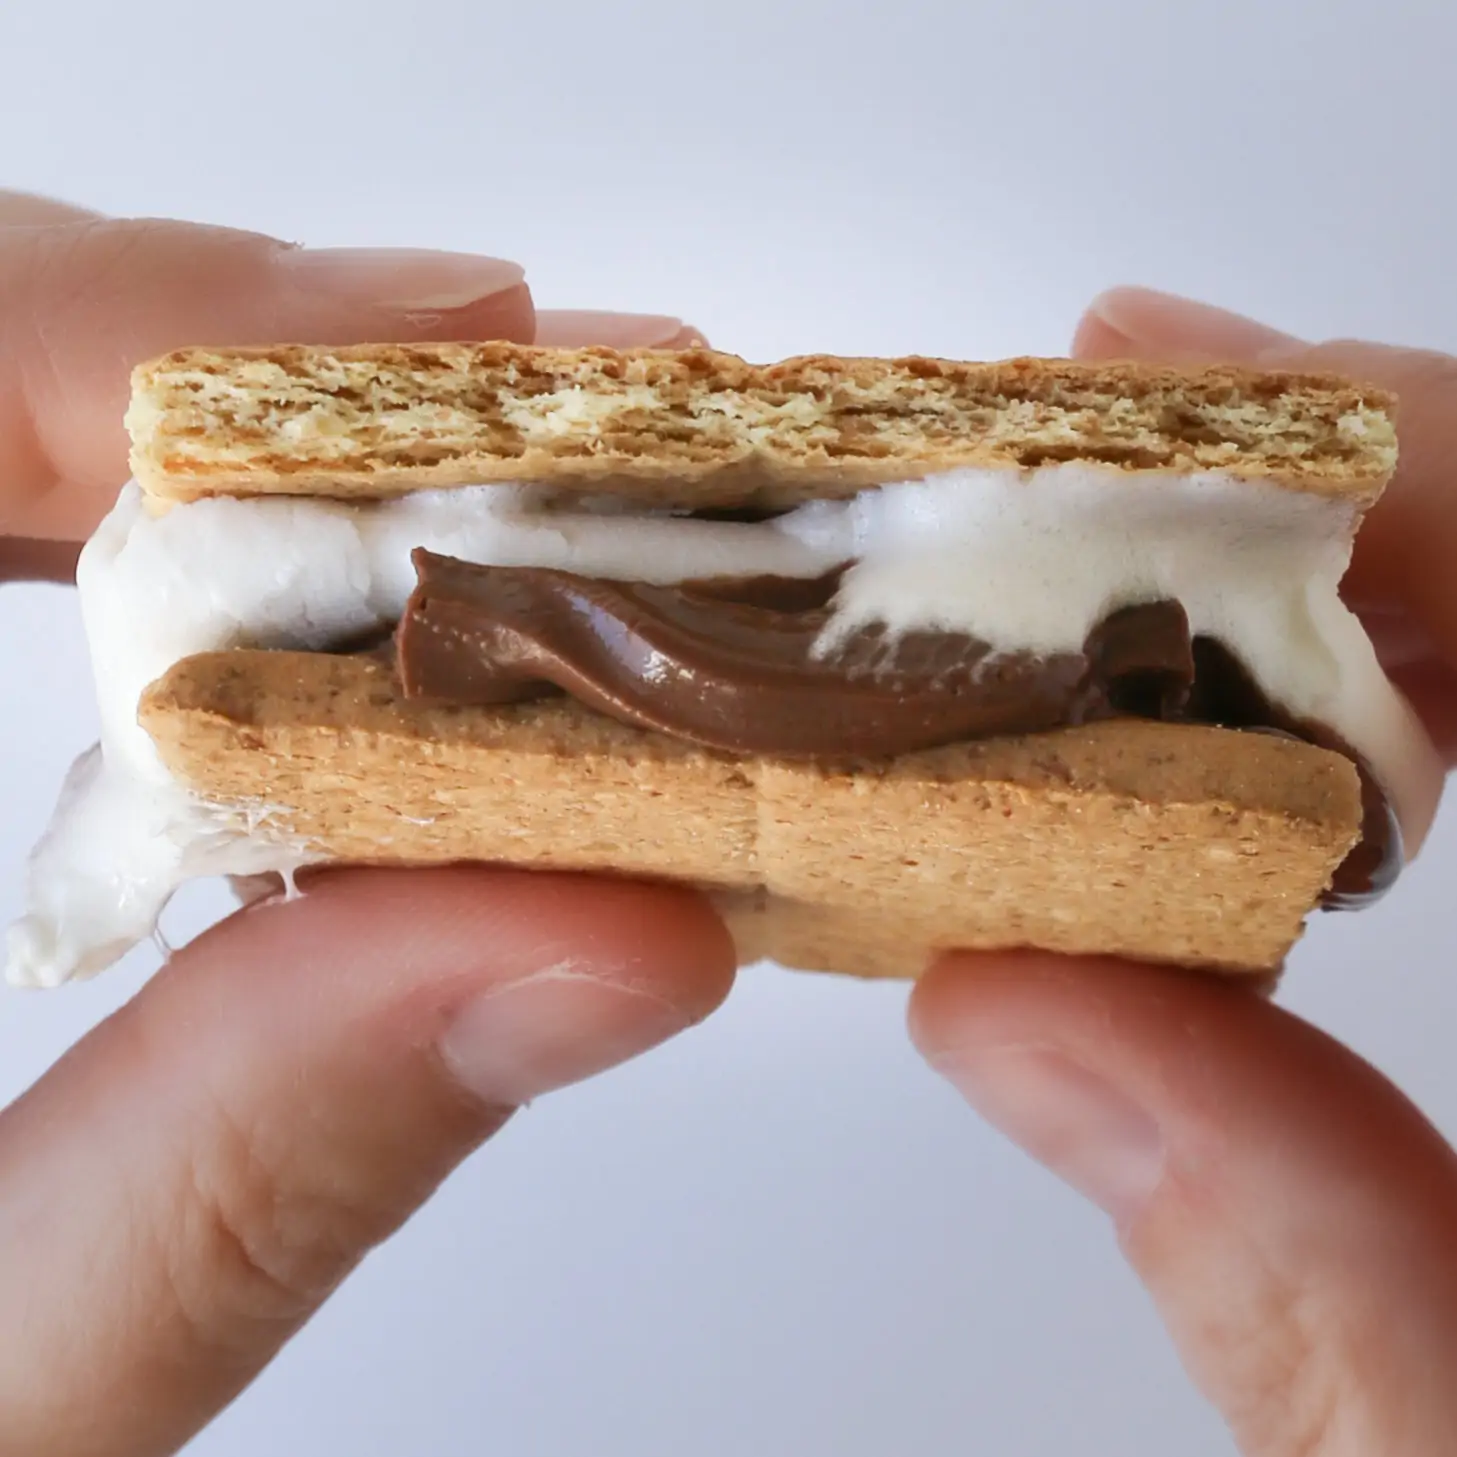 New Campfire S'mores M&M's and White Chocolate Toasty Vanilla